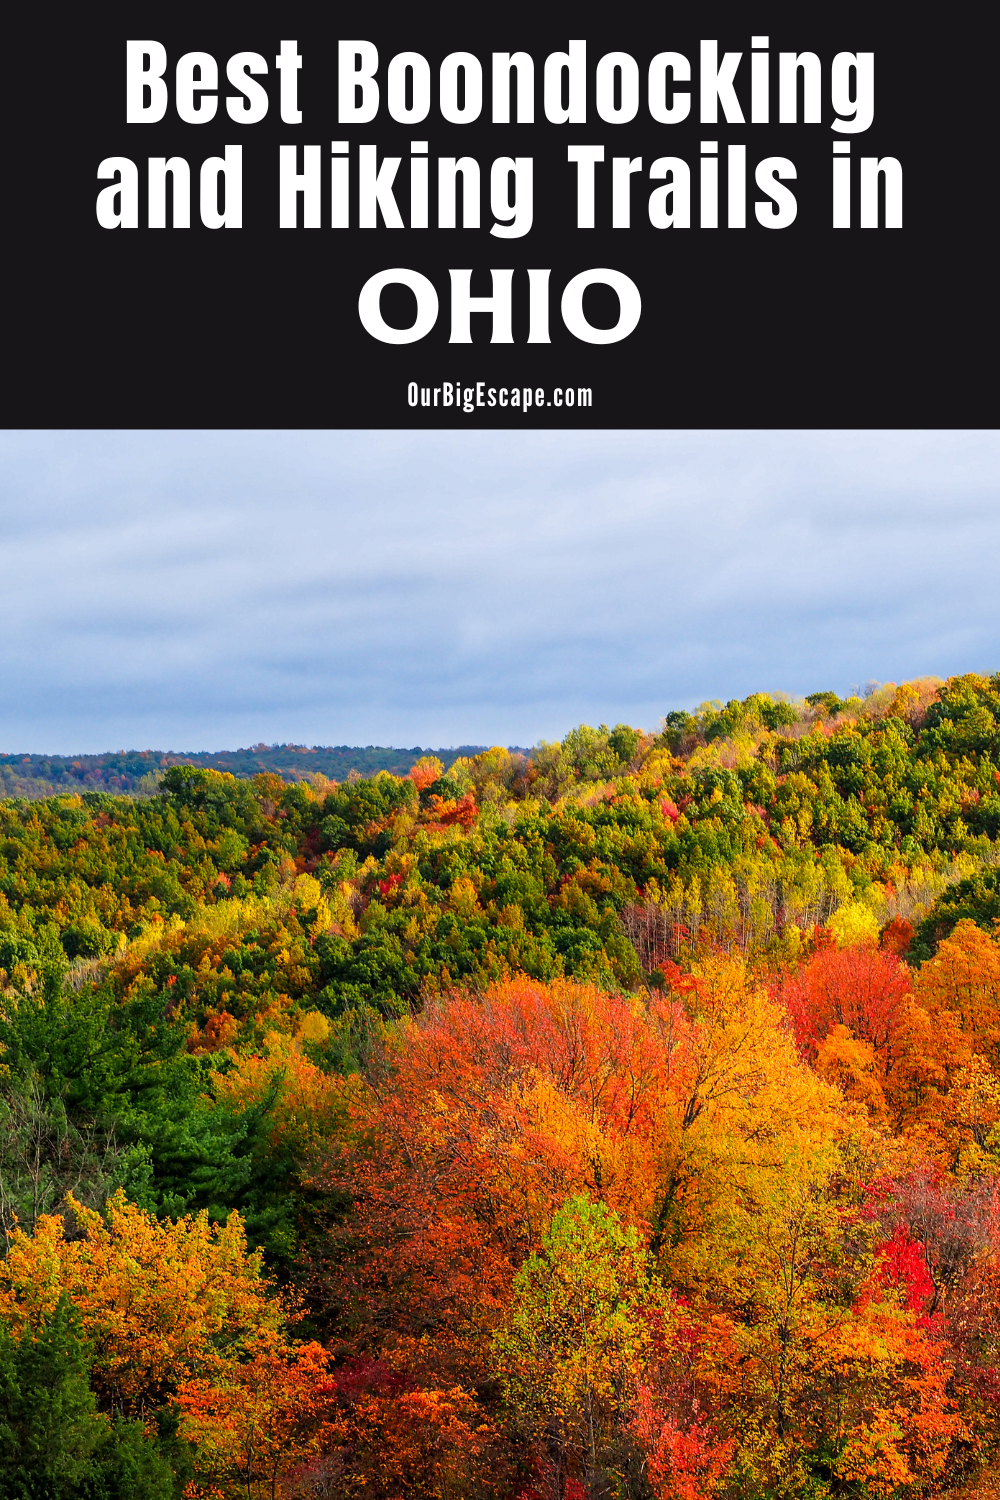 Best Boondocking and Hiking Trails in Ohio